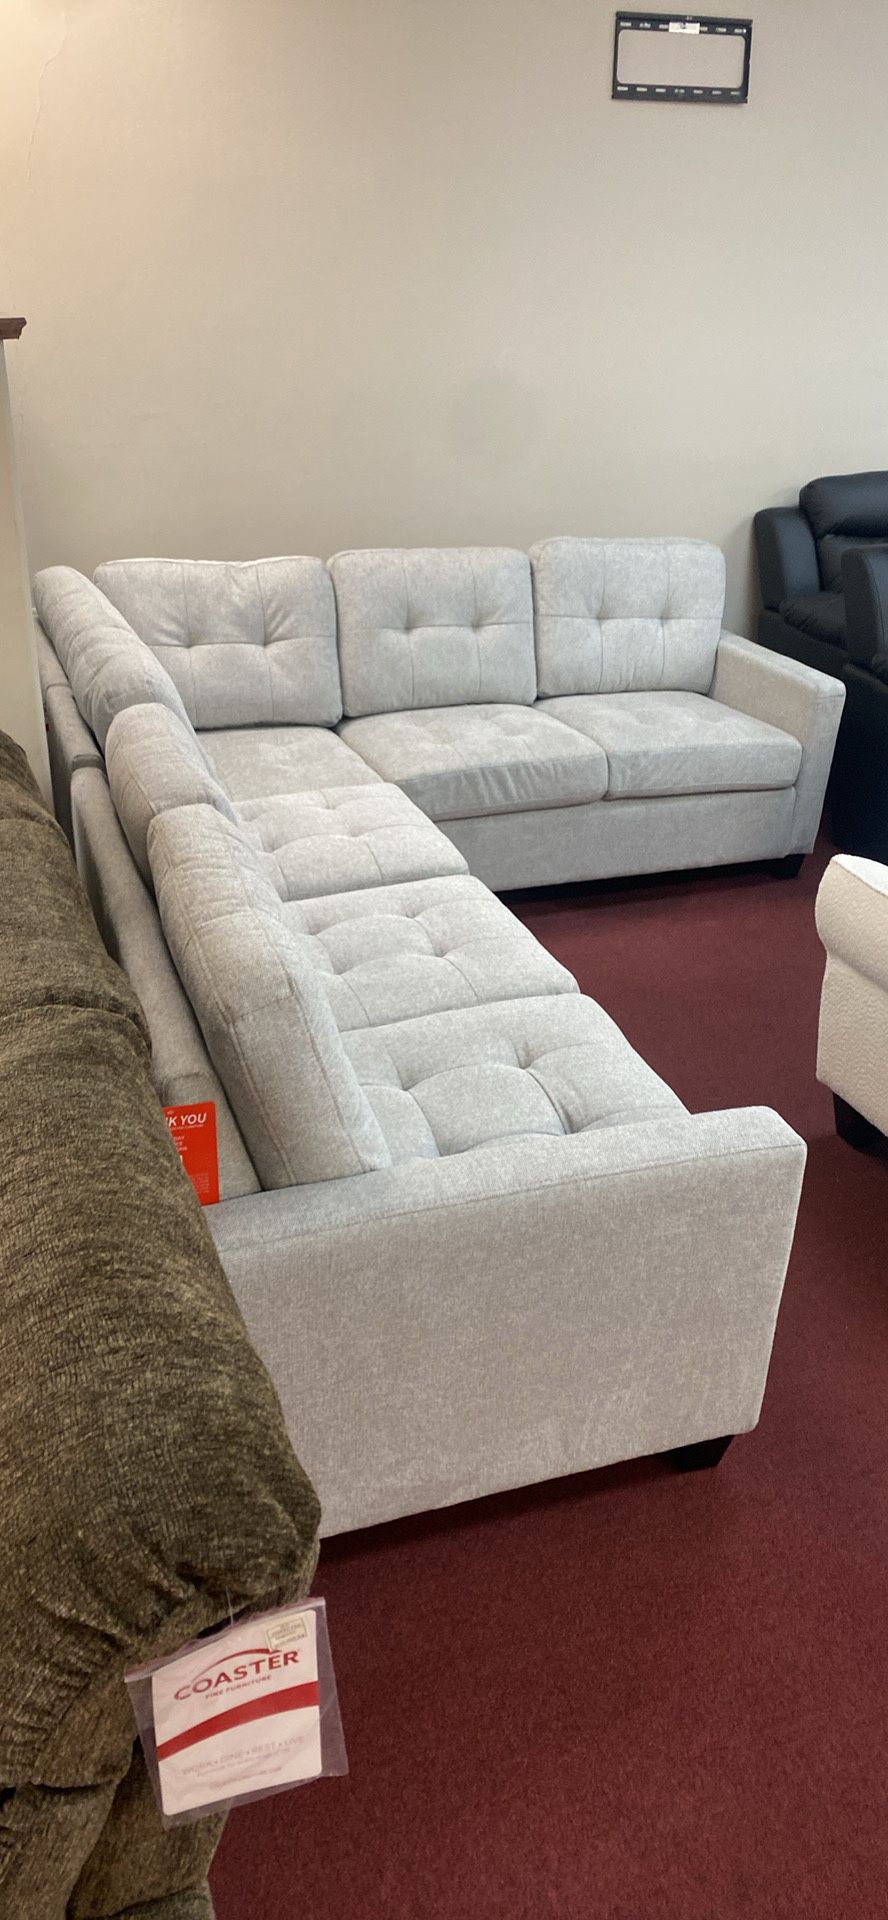 Brand New Sectional Sale For Only 10 Today! Quick Delivery!